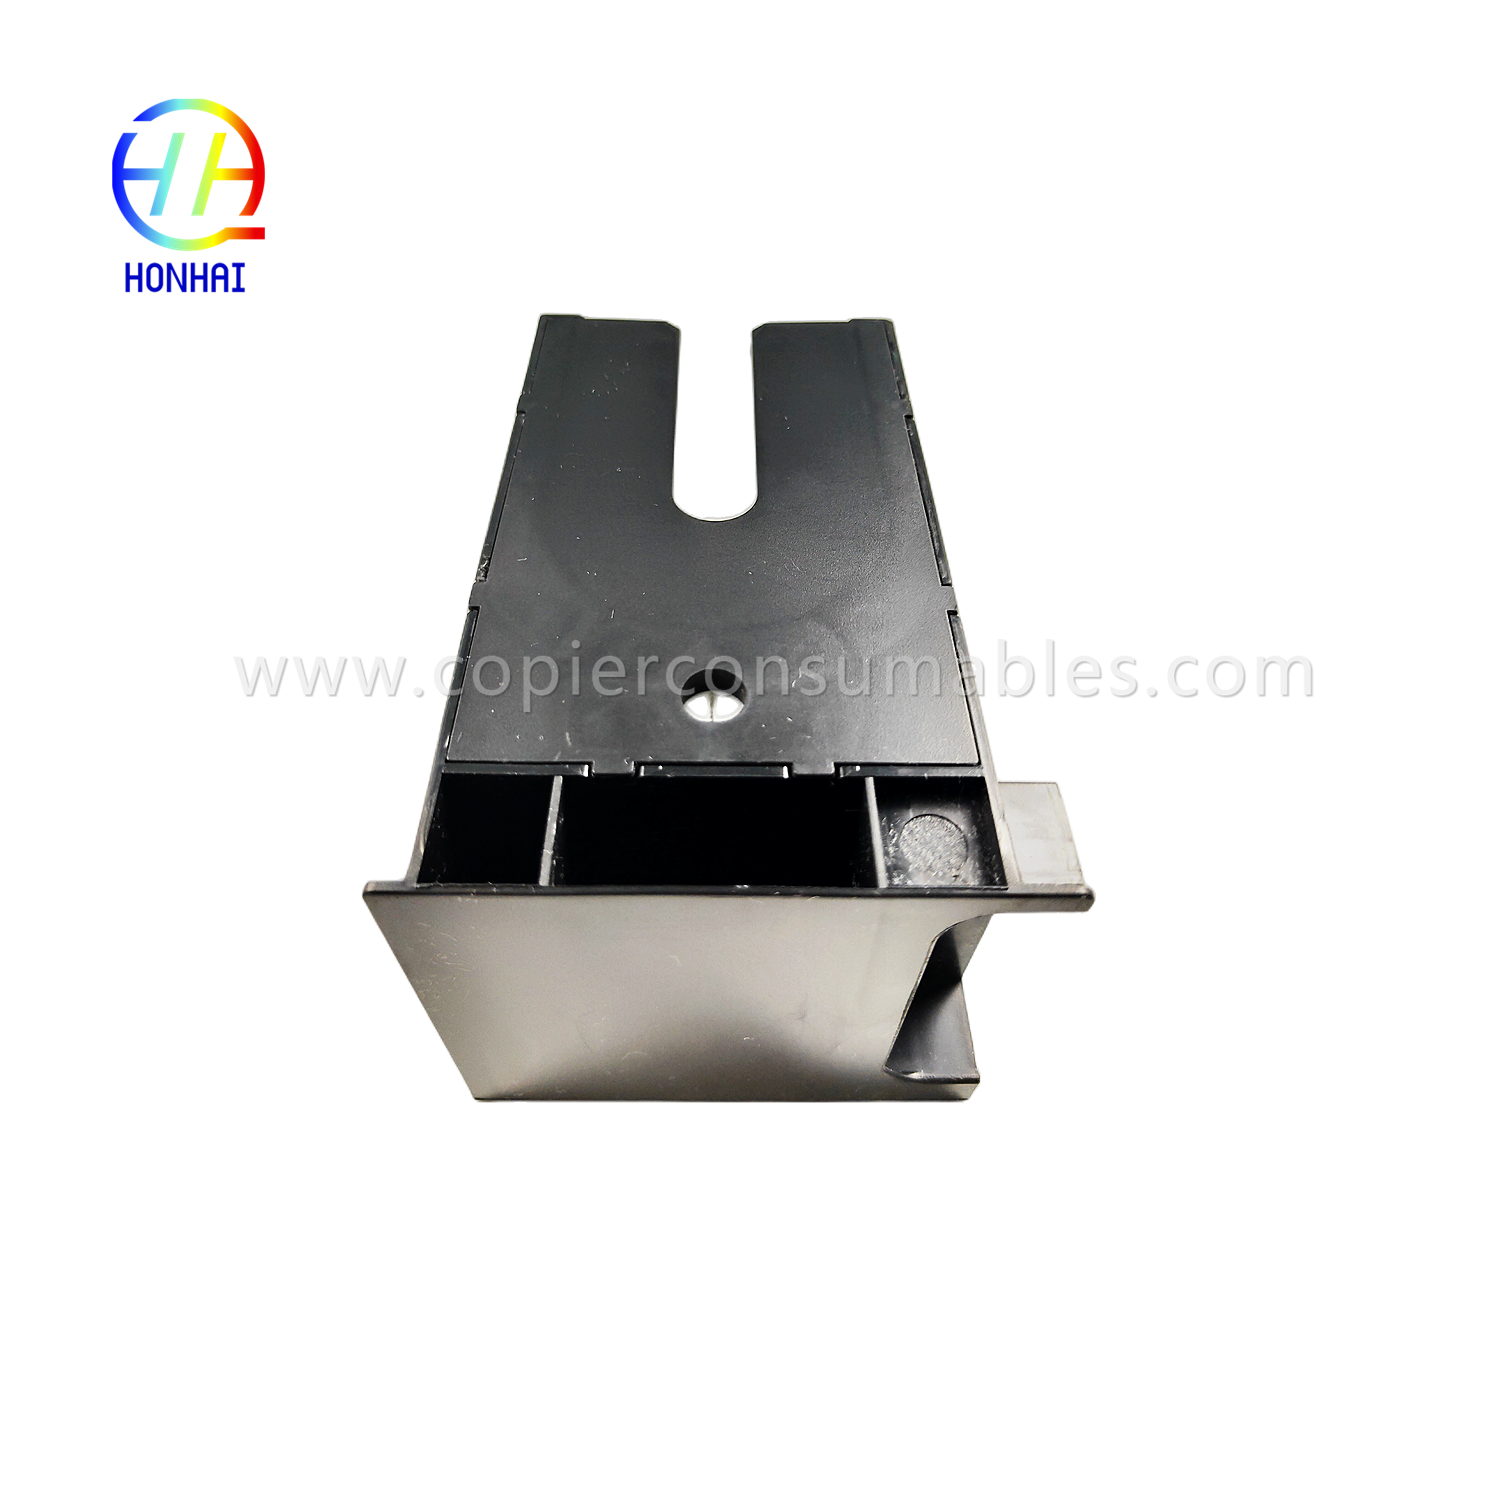 https://www.copierconsumables.com/waste-box-for-epson-workforce-wp-4535-4540-4545-4590-4595-m4015-m4095-m4525-m4595-t6710-ngwaahịa/